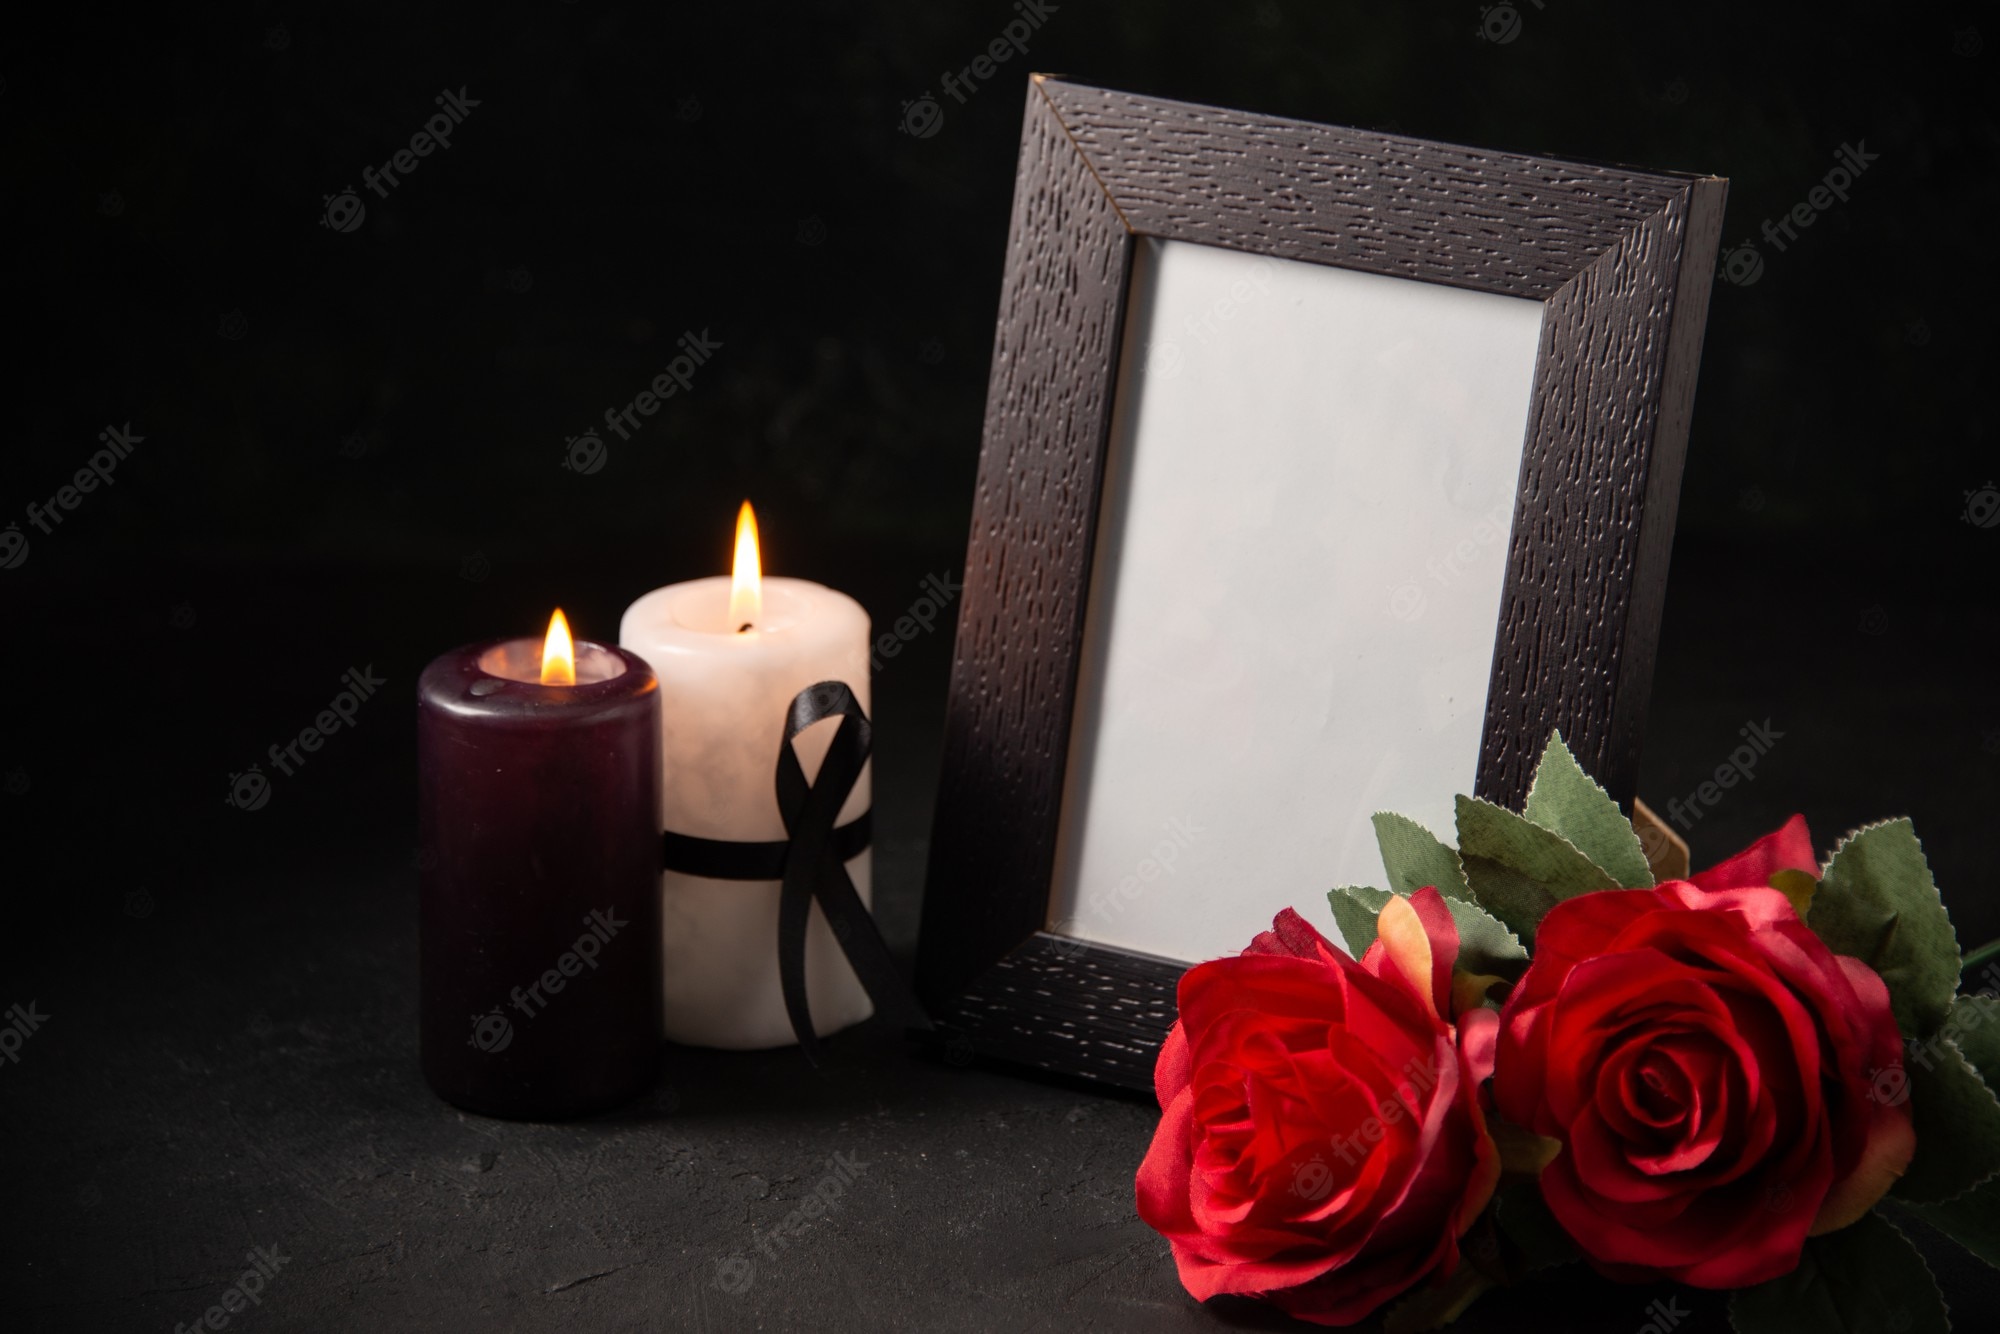 Candle Flower Image. Free Vectors, & PSD